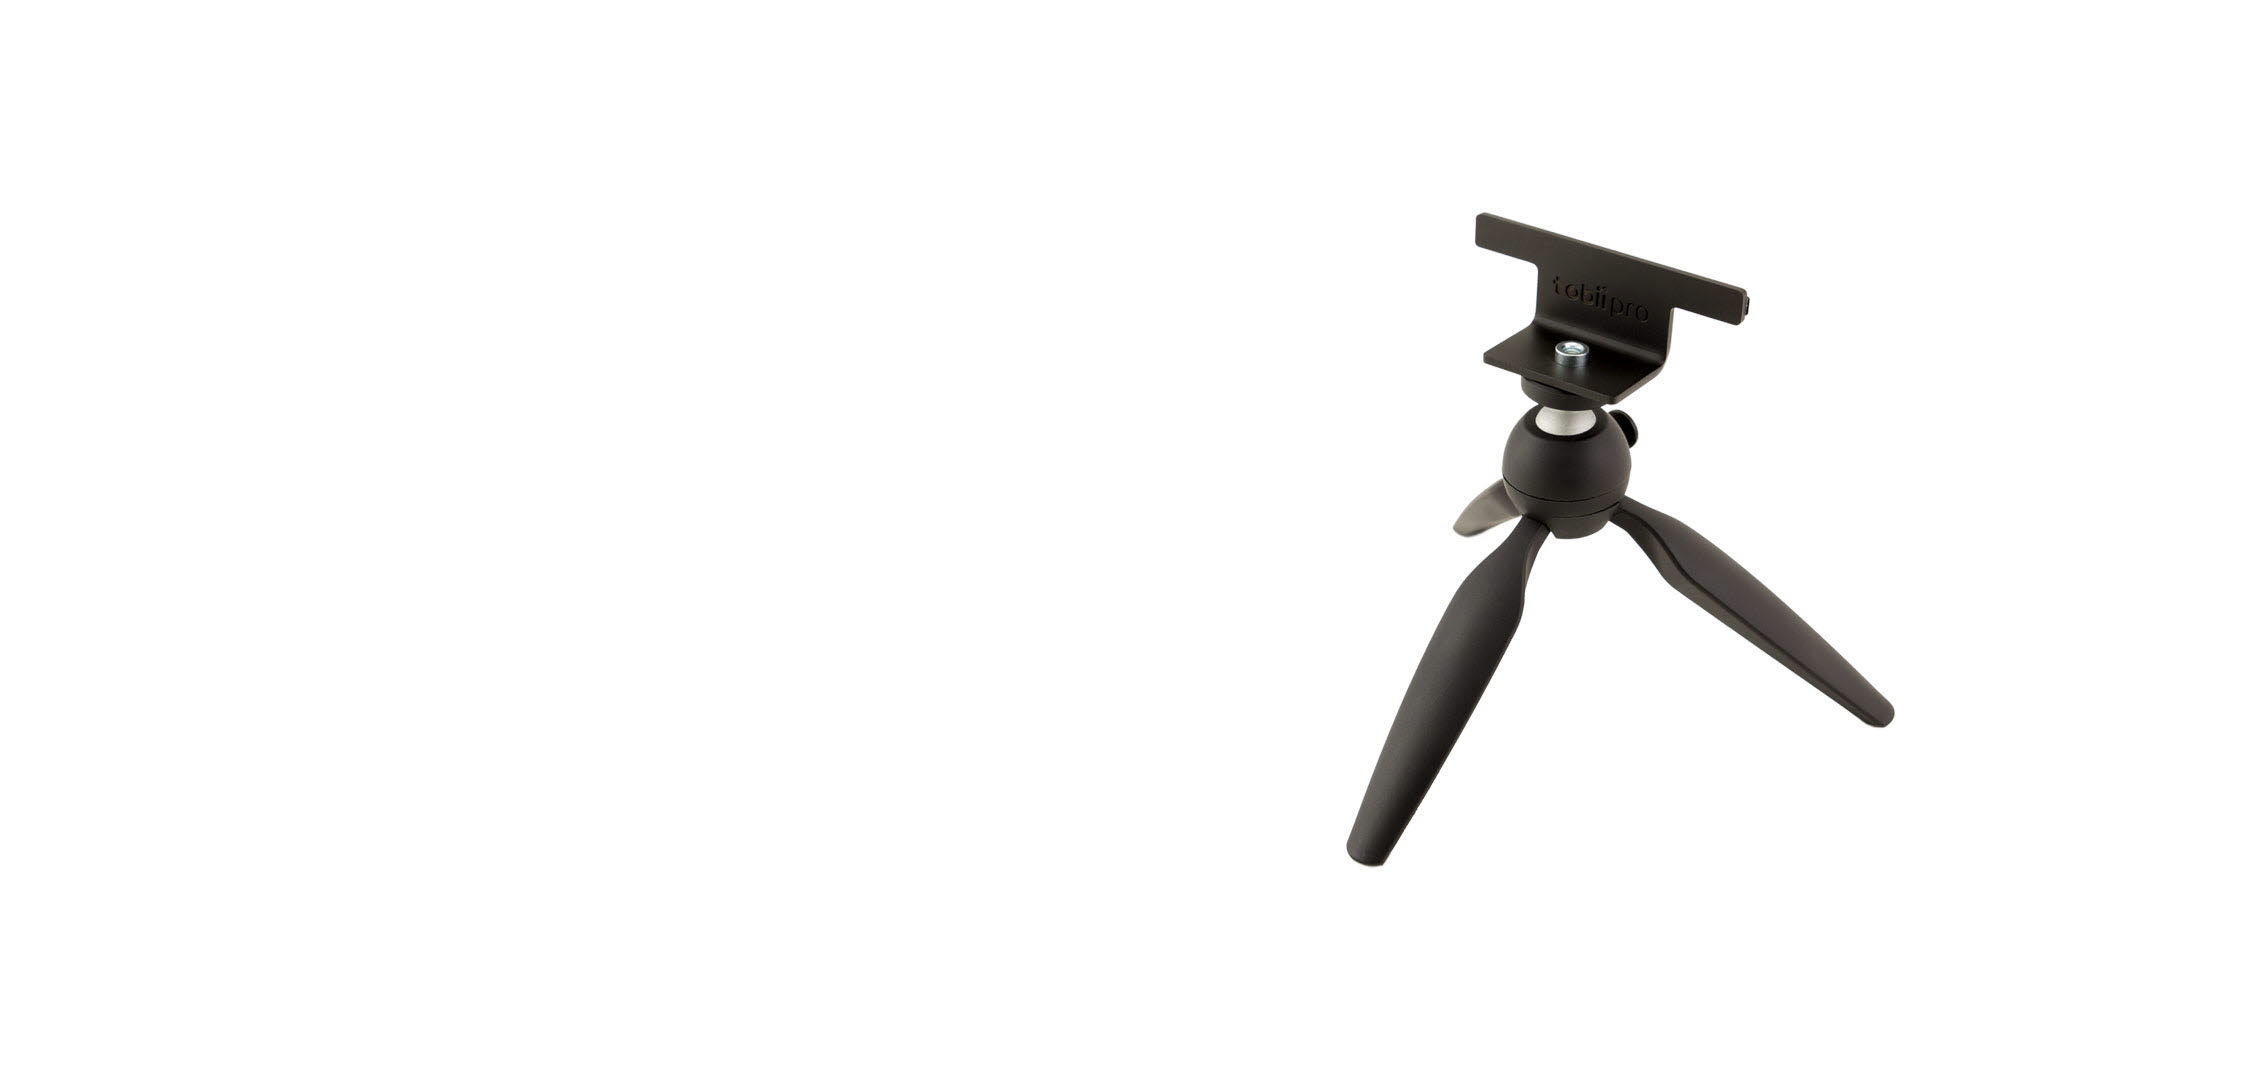 A tripod stand for Pro X3-120 eye tracker